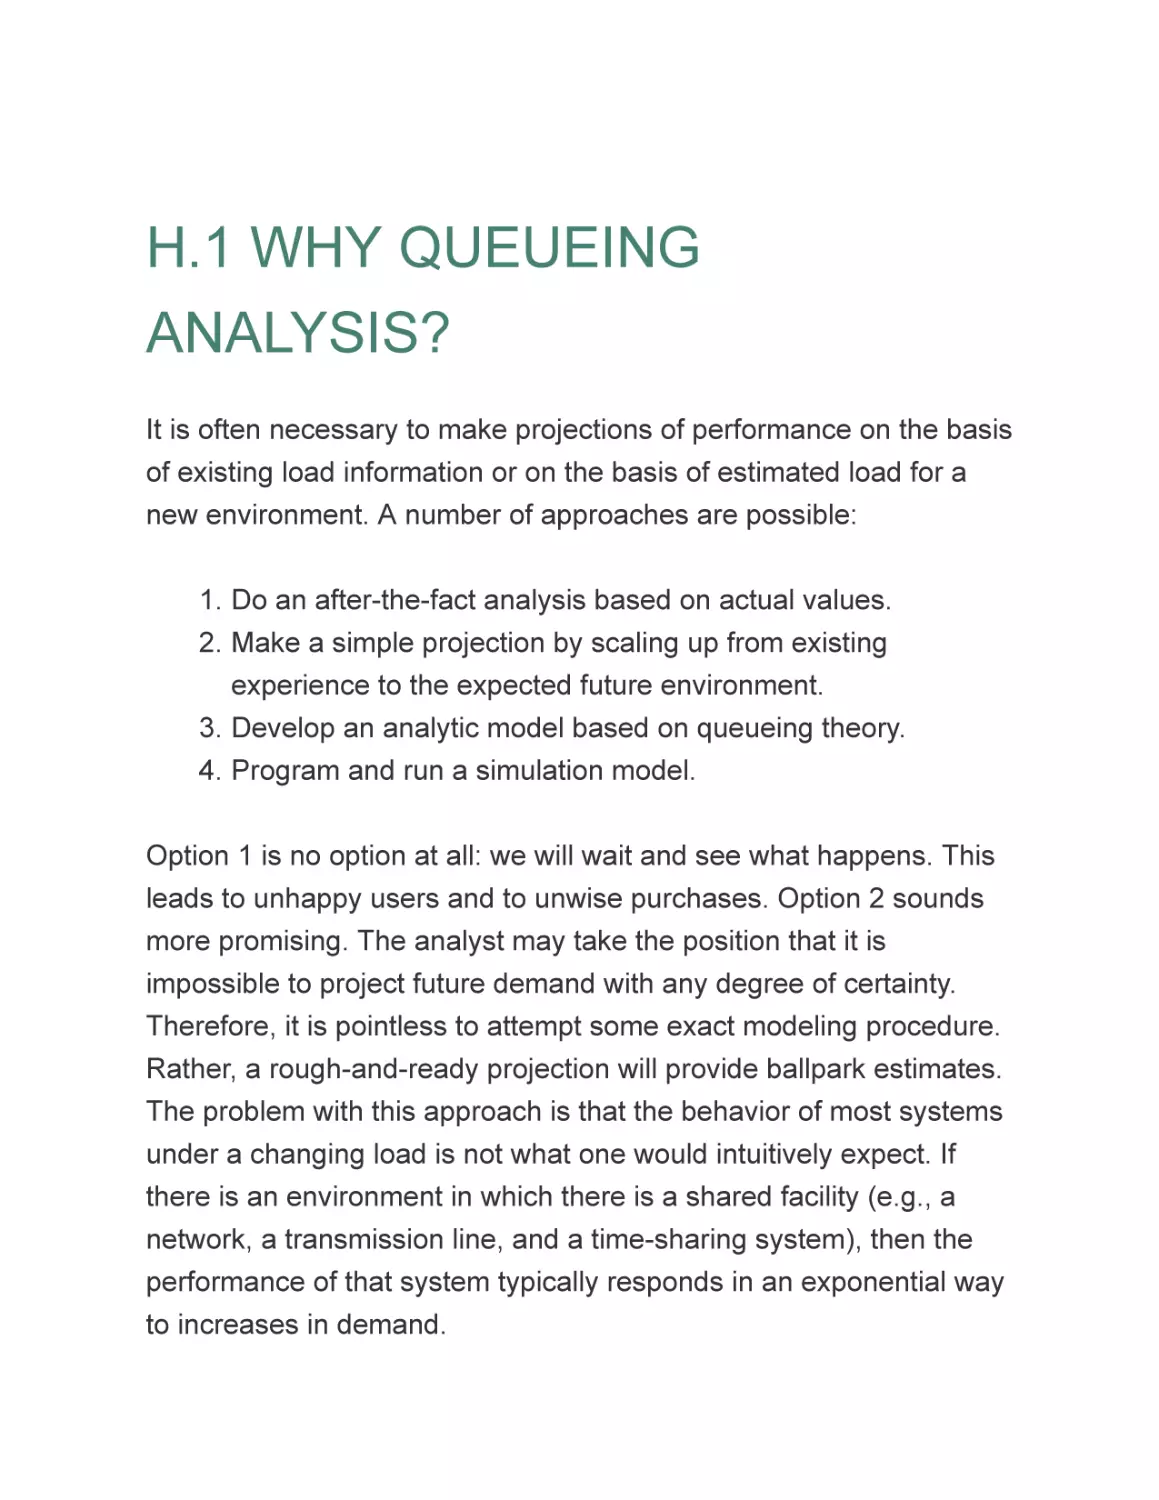 H.1 WHY QUEUEING ANALYSIS?